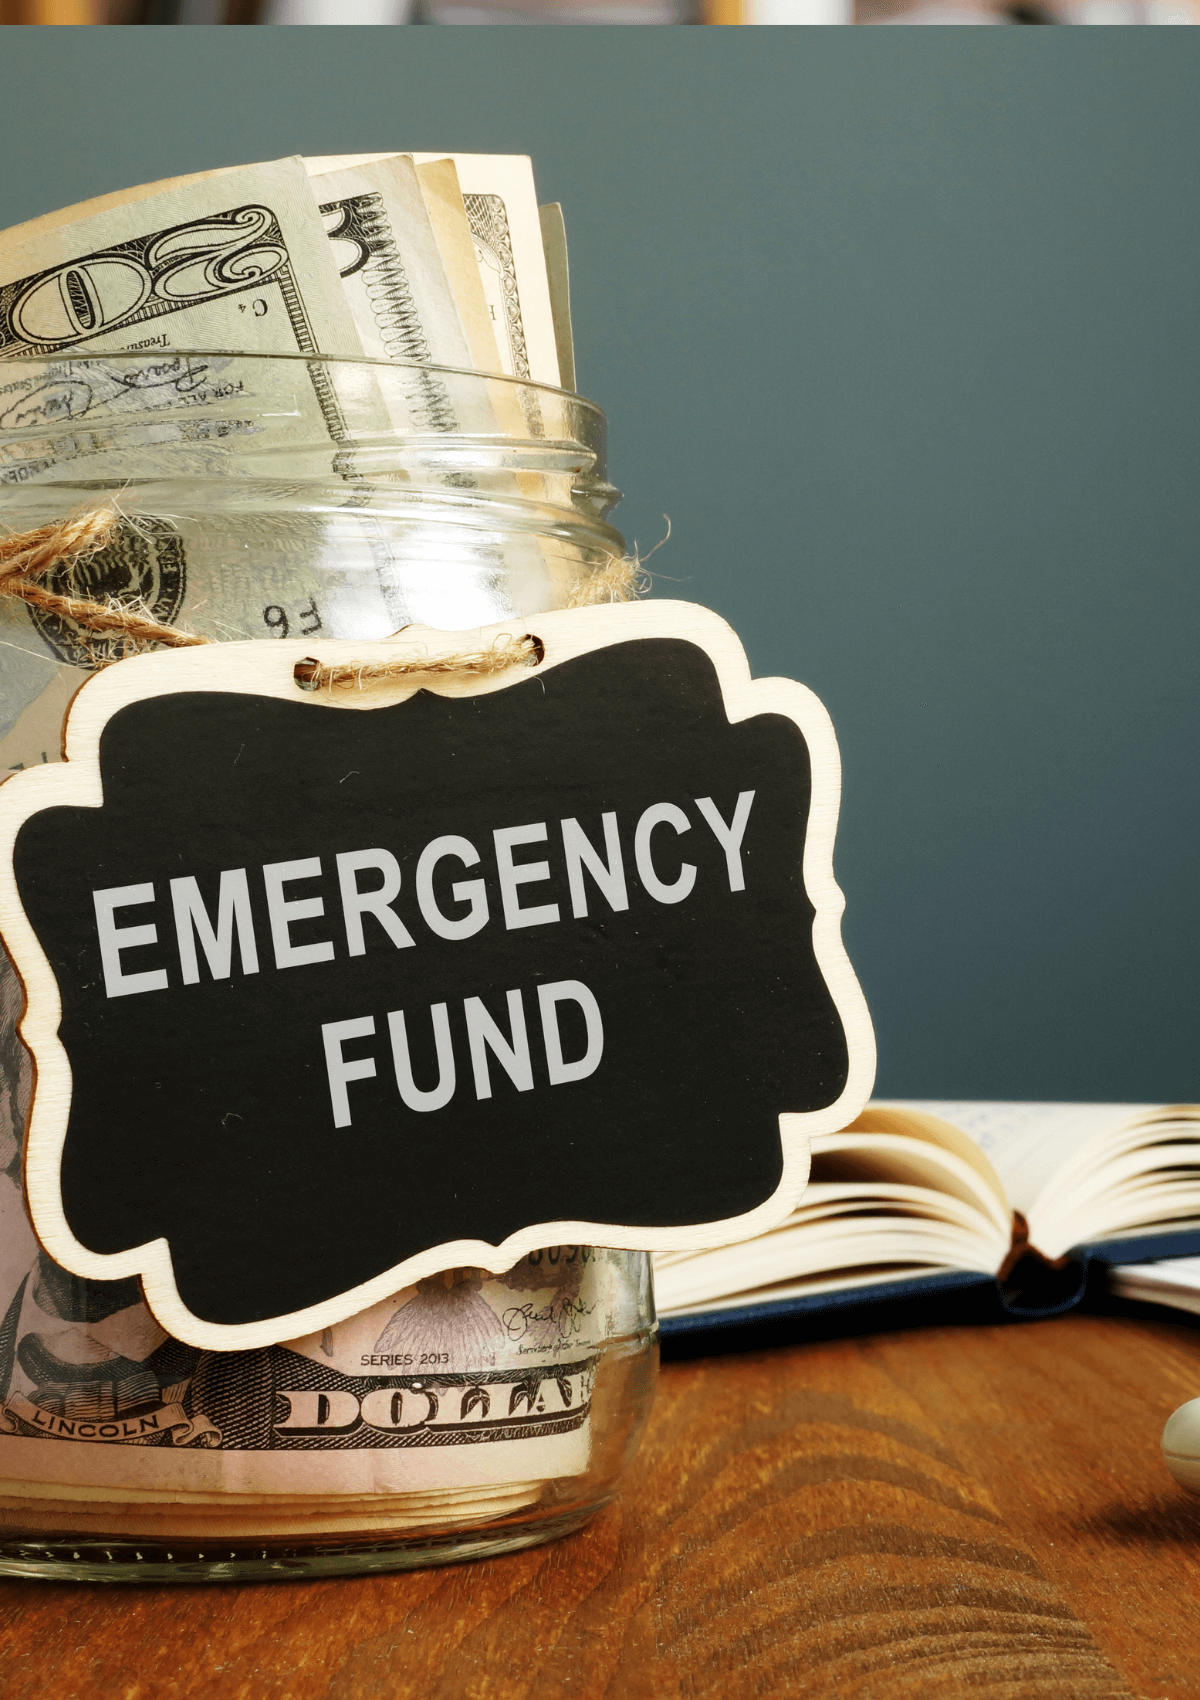 Have an emergency fund to stick to a travel budget